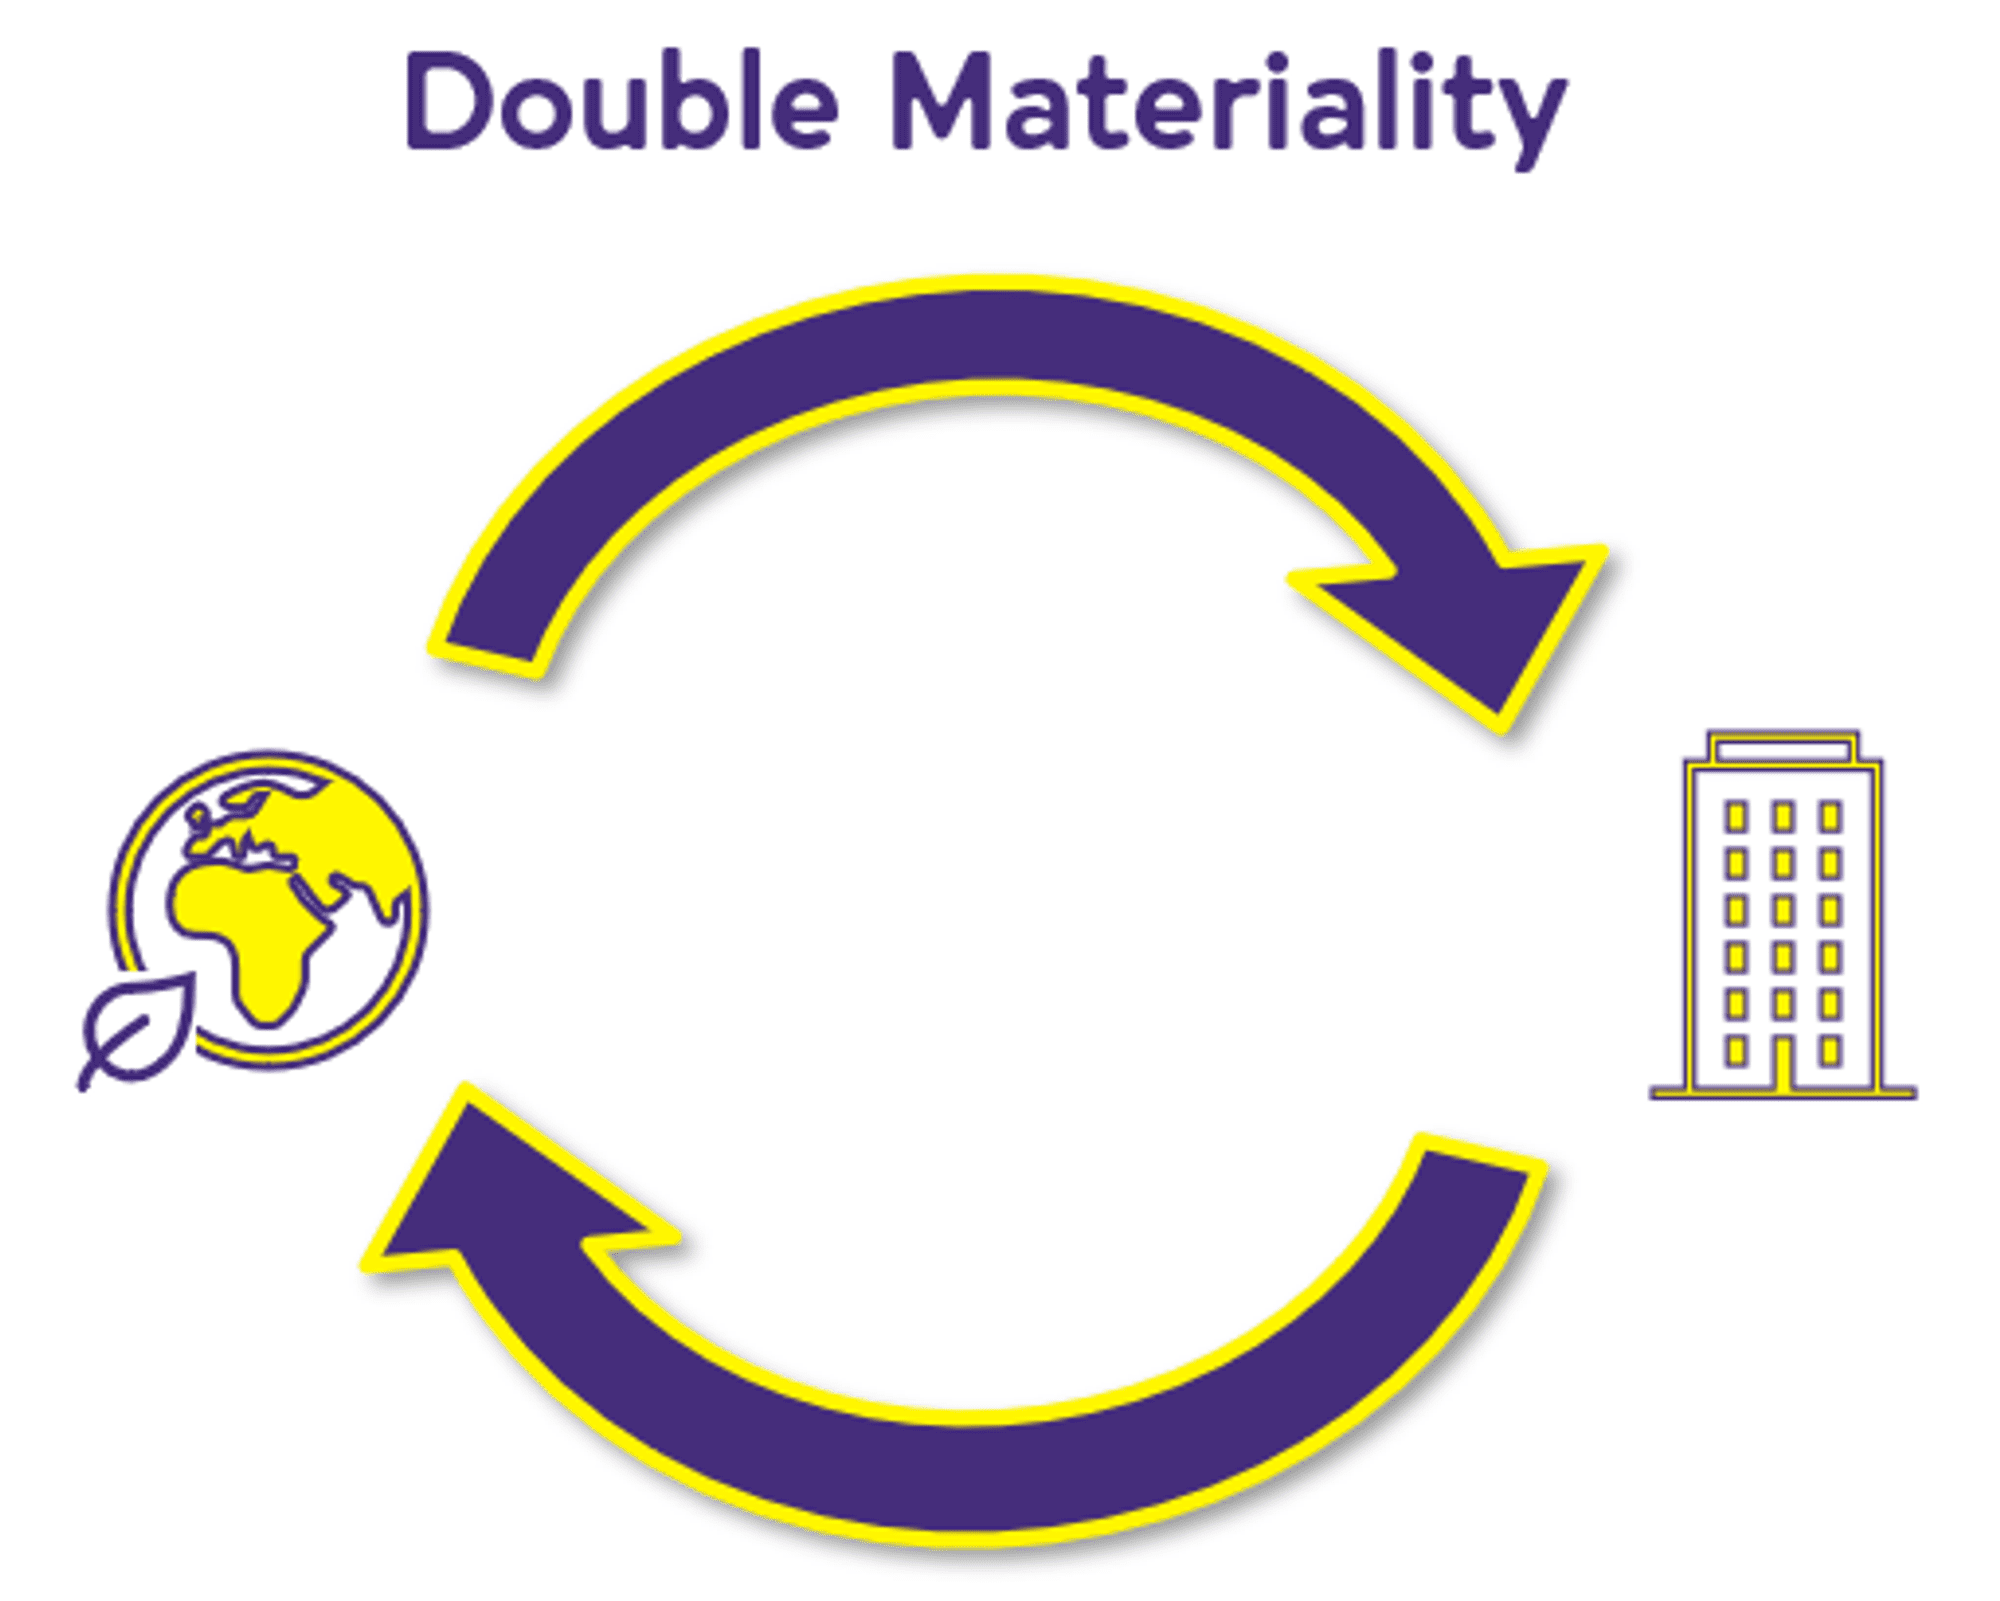 Visual 2: Double Materiality assesses how a company and the planet influence each other